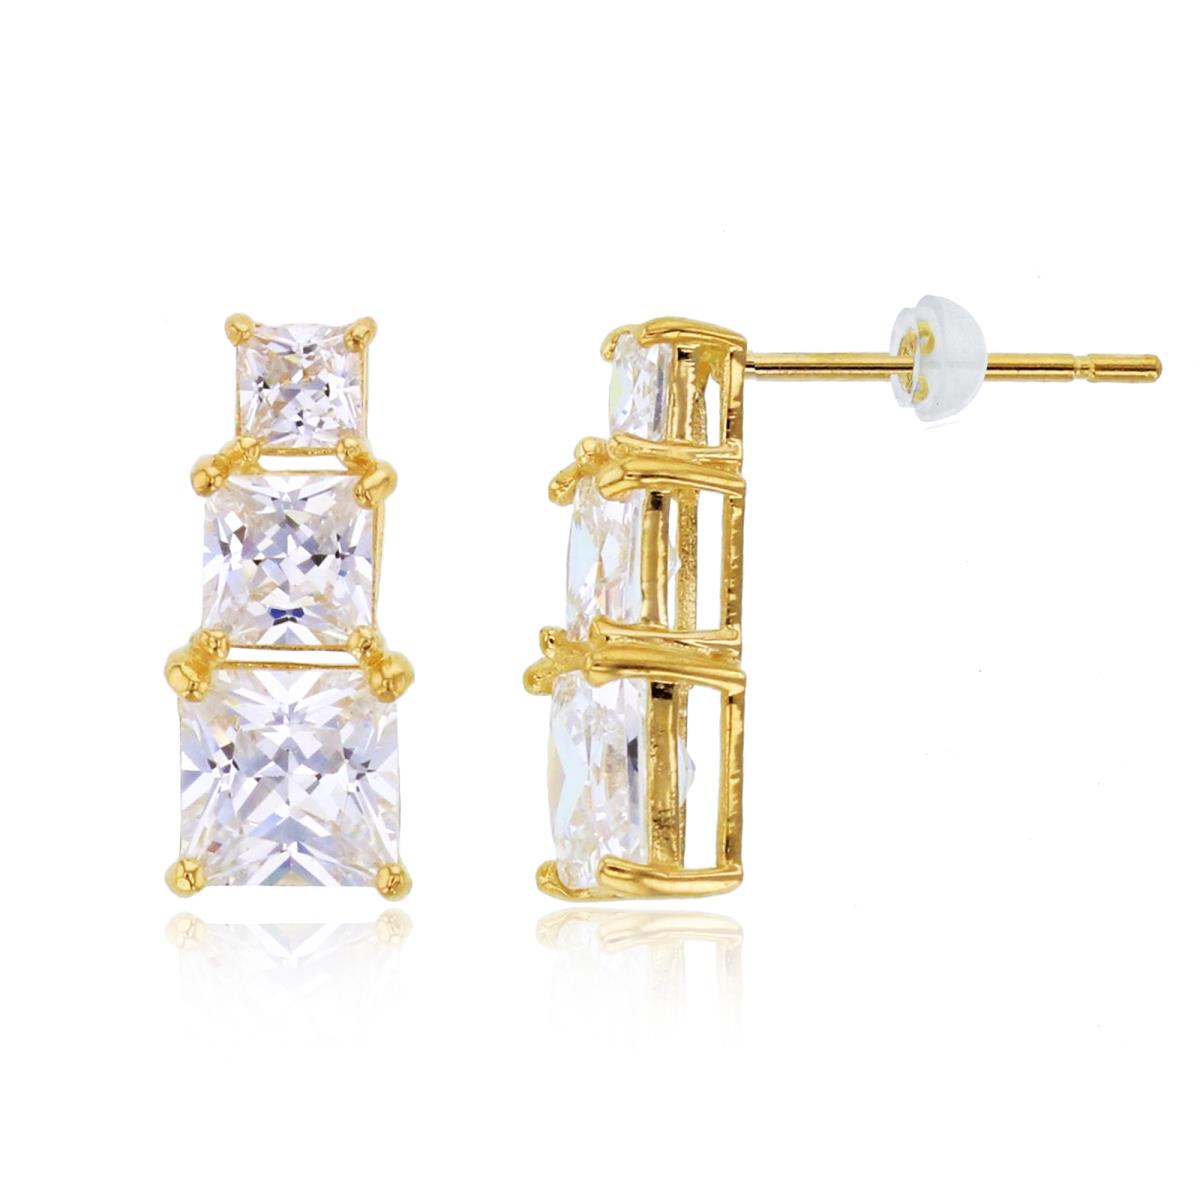 14K Yellow Gold Graduated Princess CZ Studs with Silicon Backs